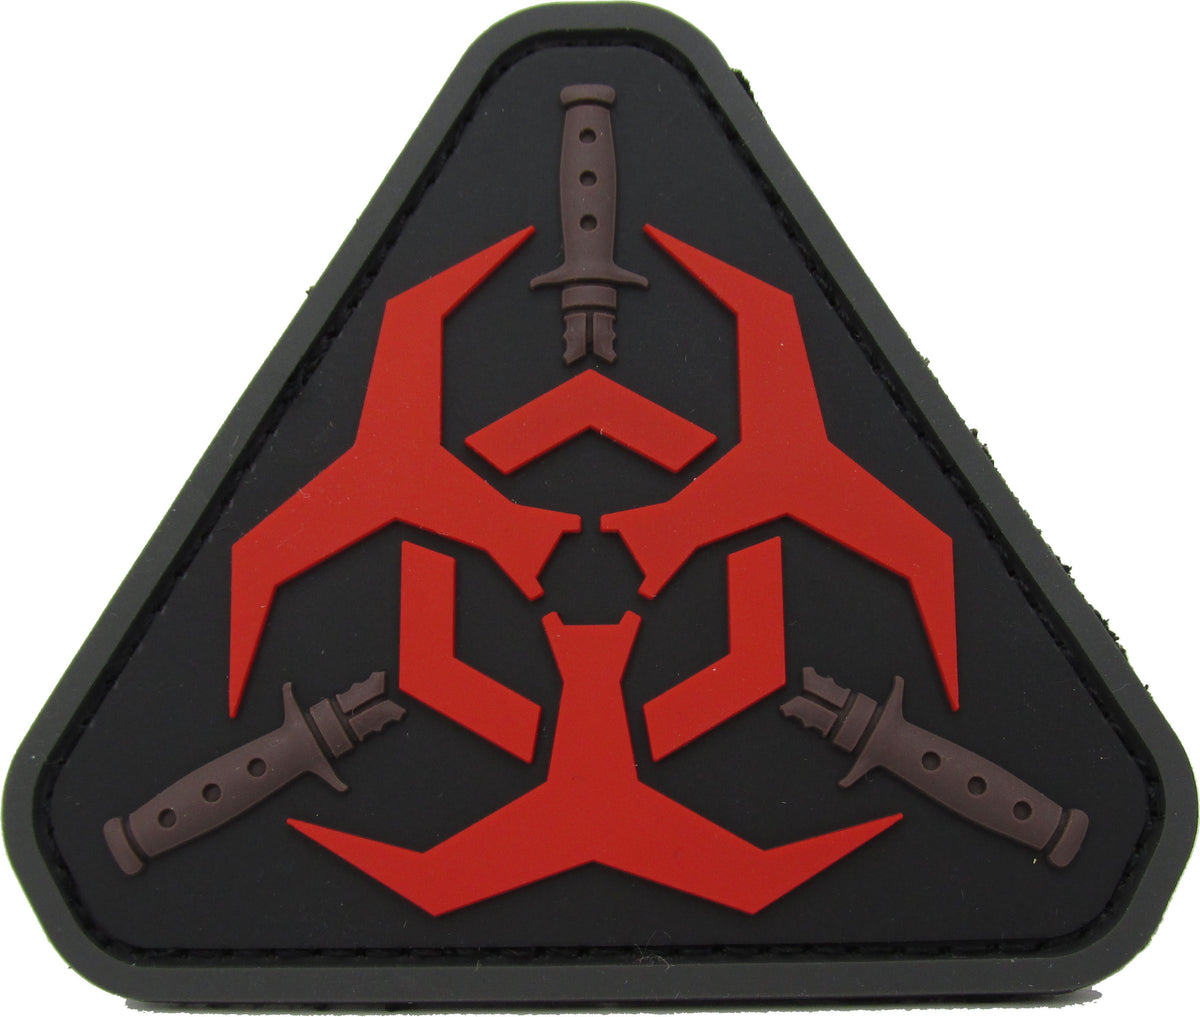 CLEARANCE - Zombie Outbreak Response Team Patch - PVC with Hook Fastener